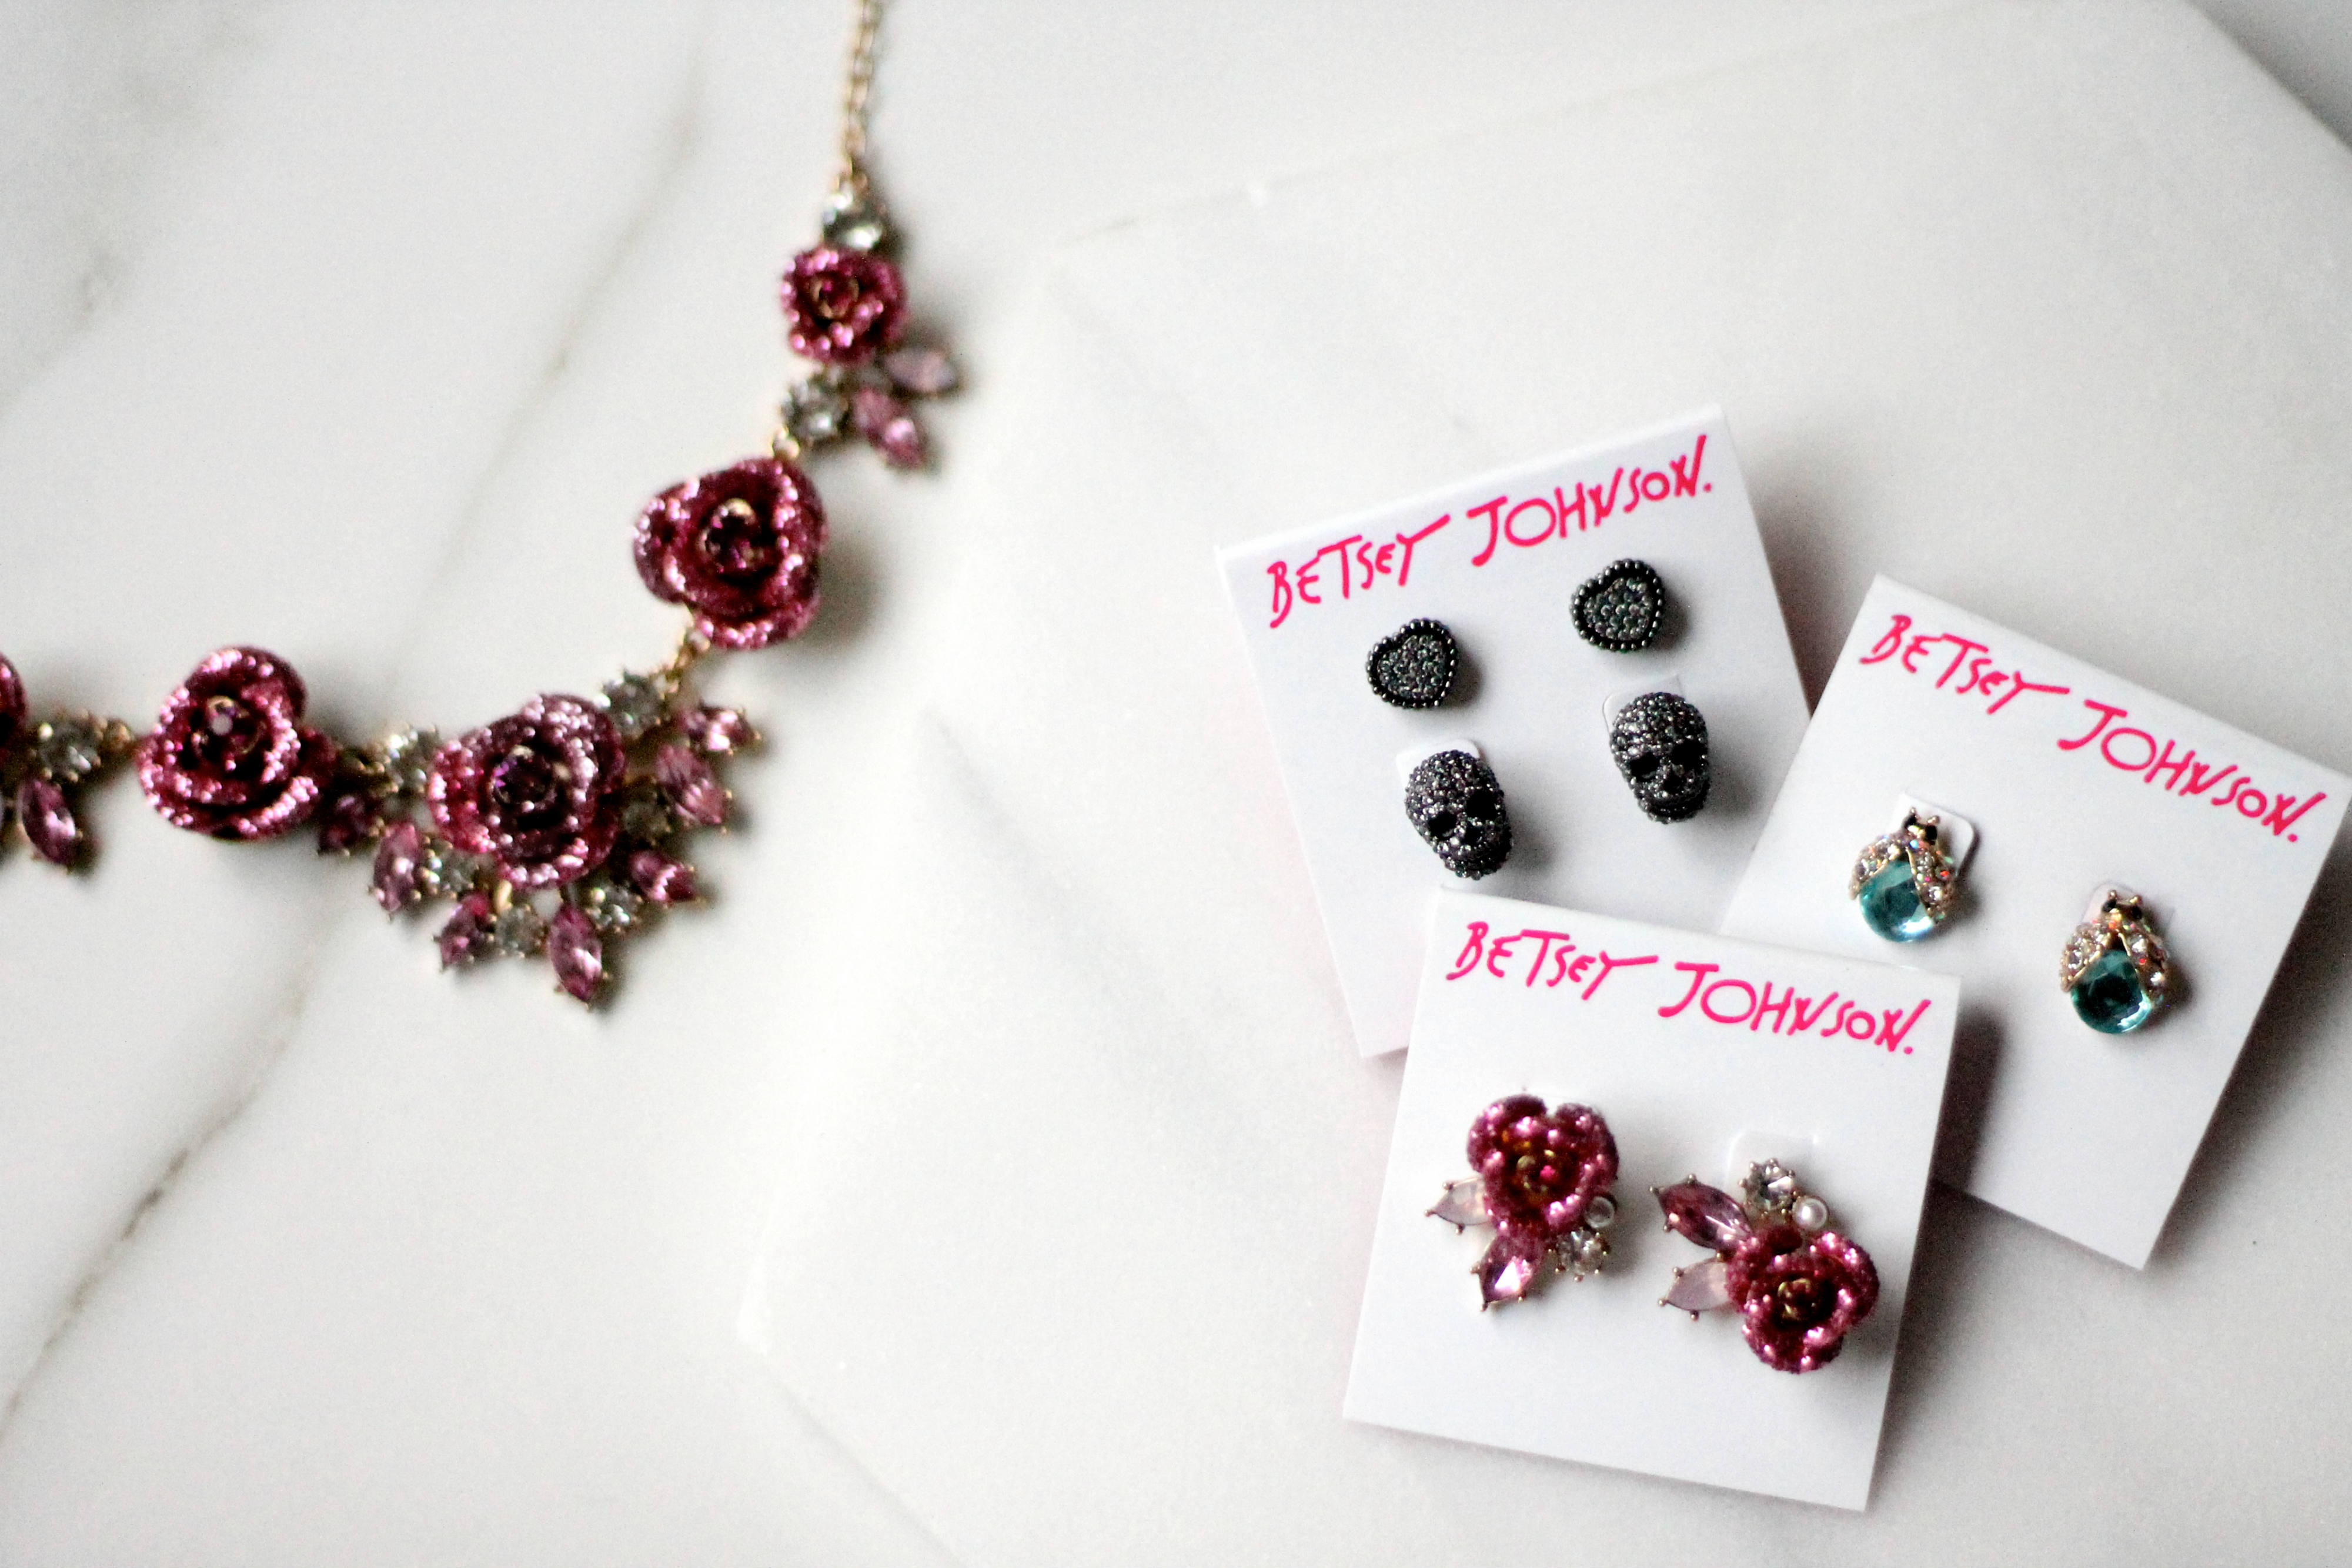 Betsey Johnson Jewelry Earrings and Necklace Arrive At Best Buy